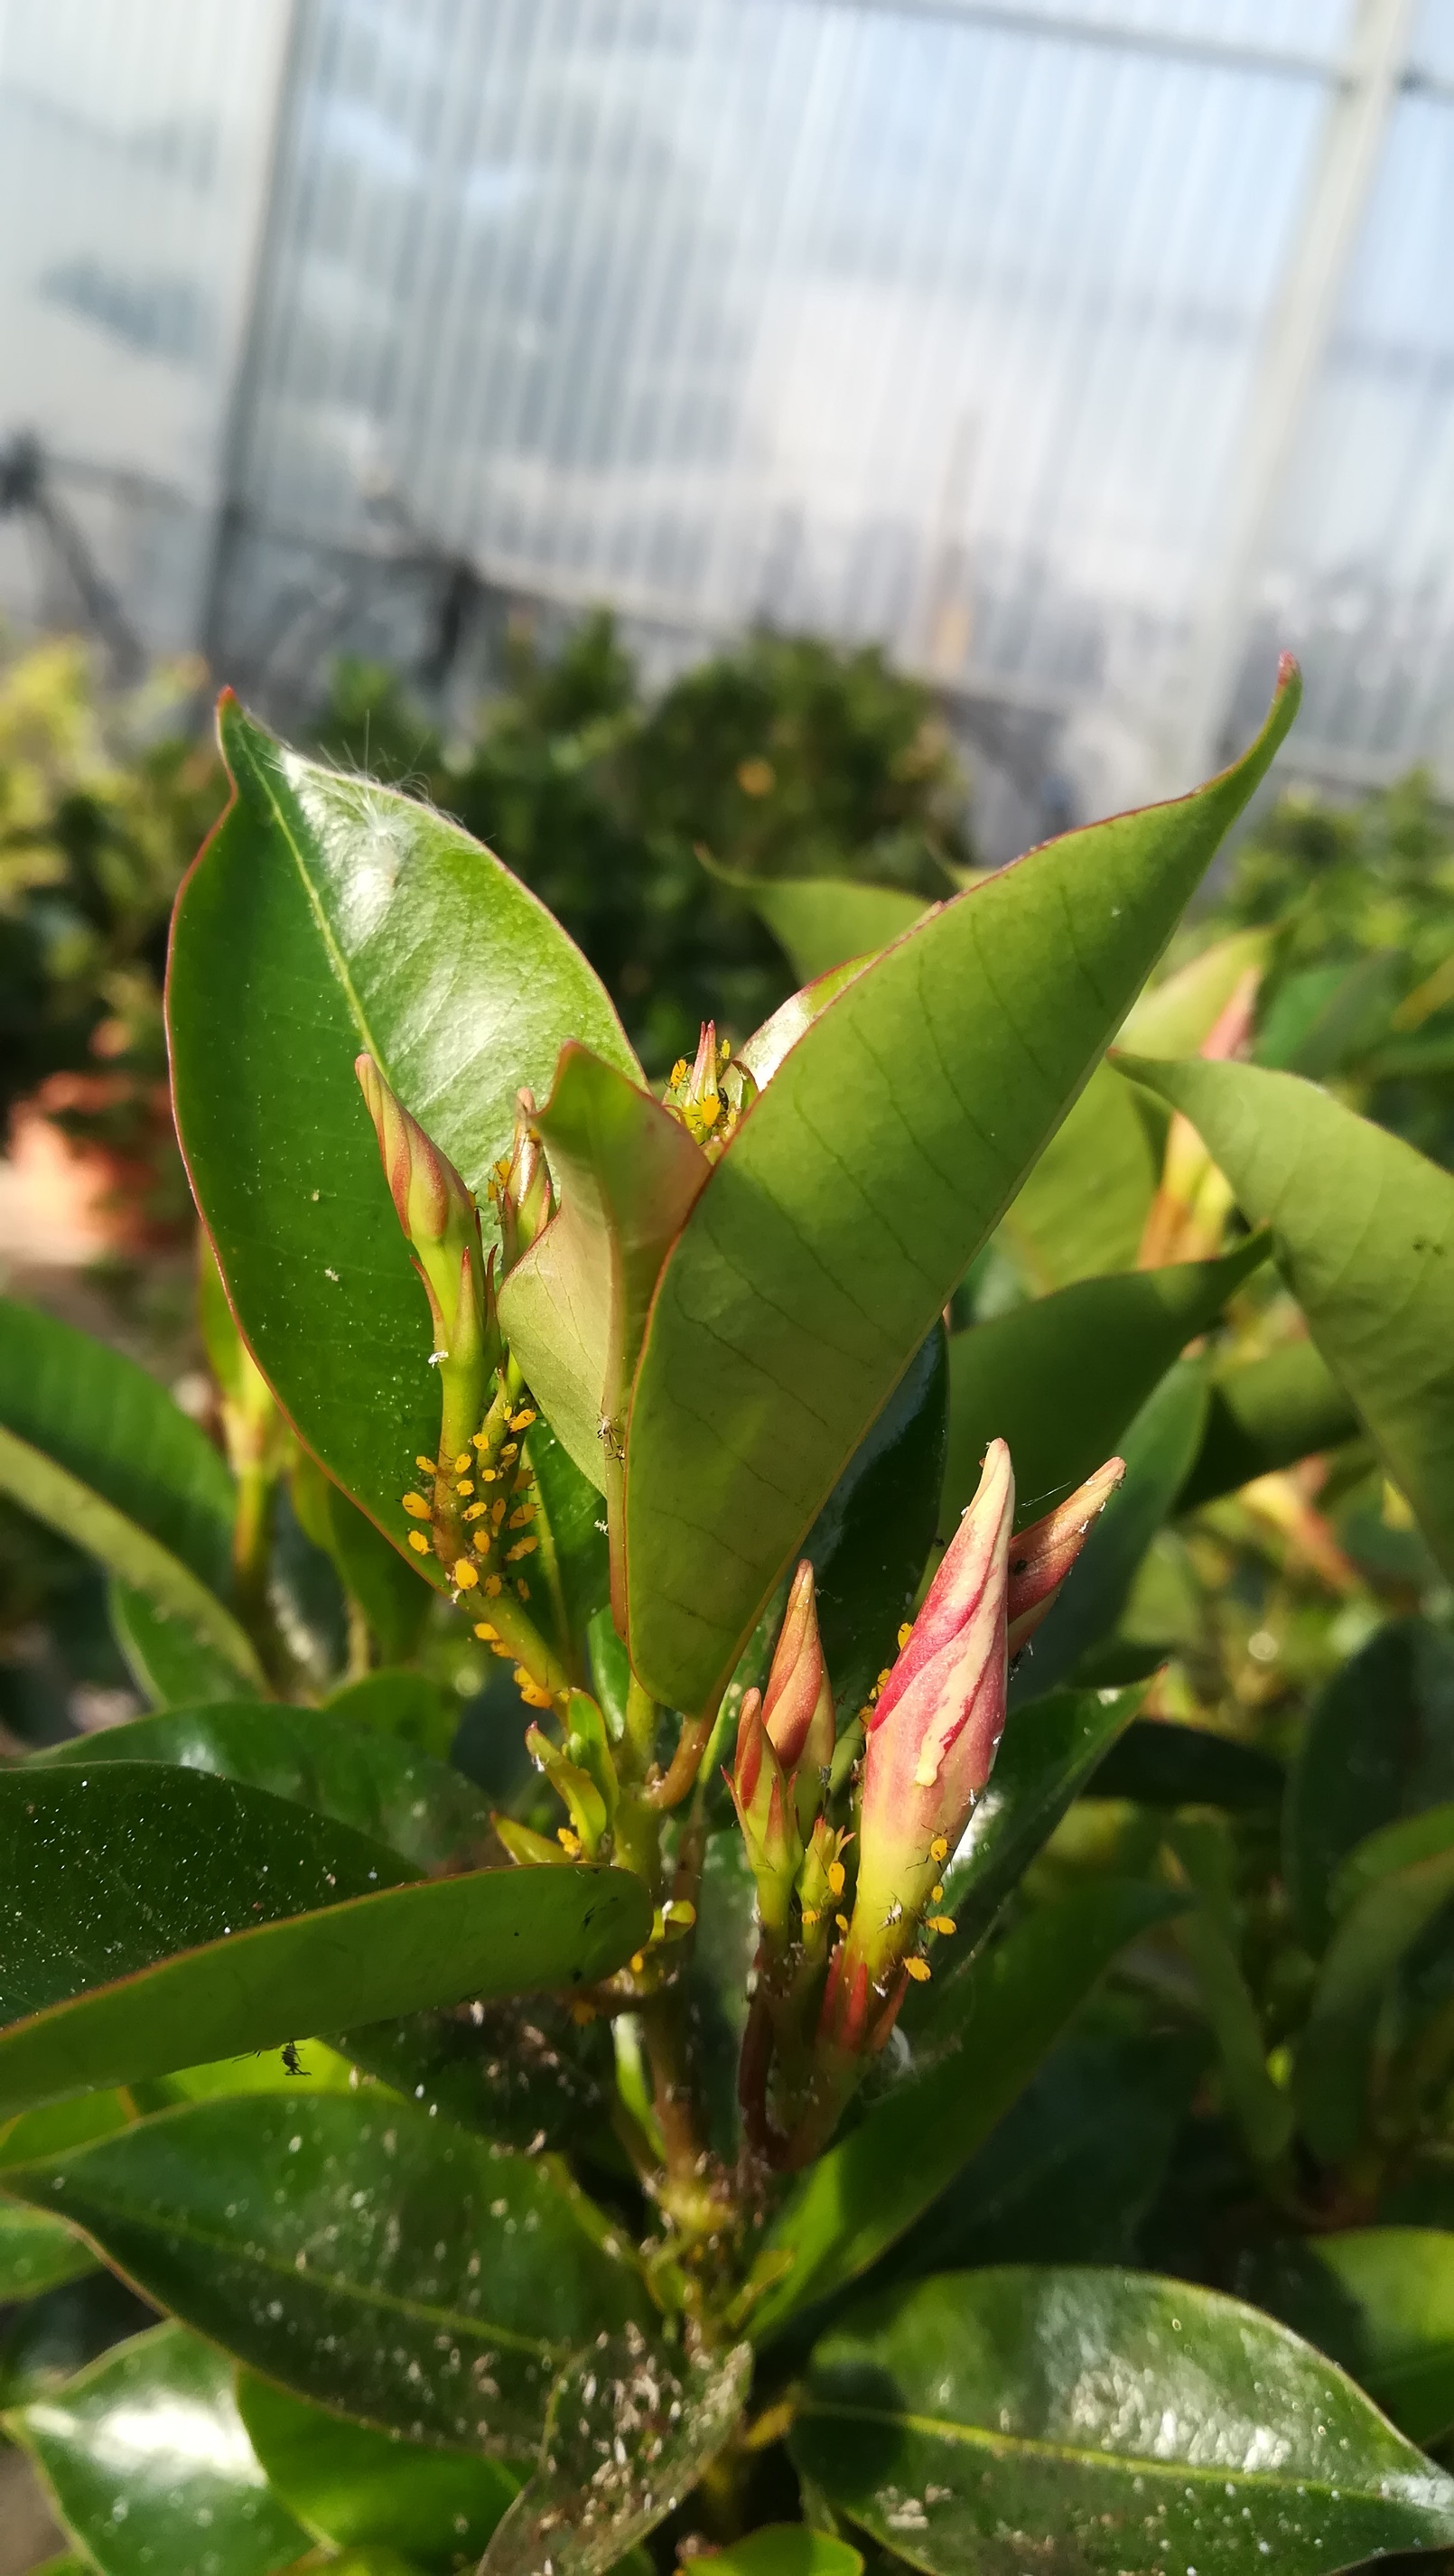 Dipladenia plant infected by Oleander aphid Aphis nerii